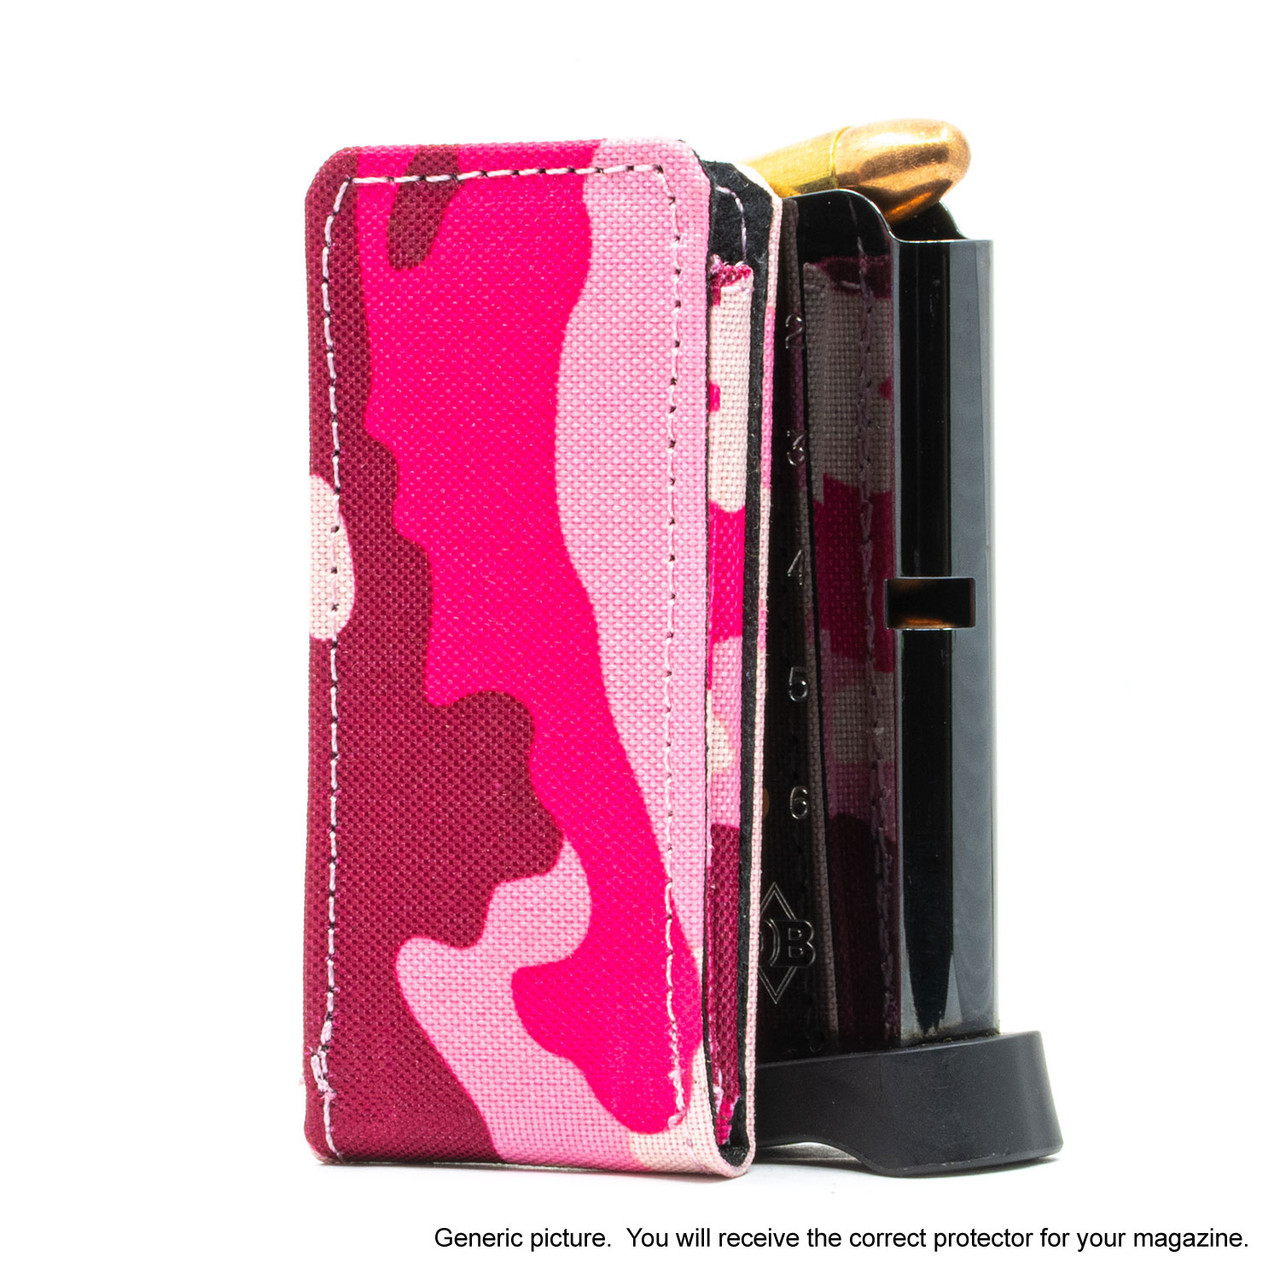 CZ 75D Compact Pink Camouflage Magazine Pocket Protector